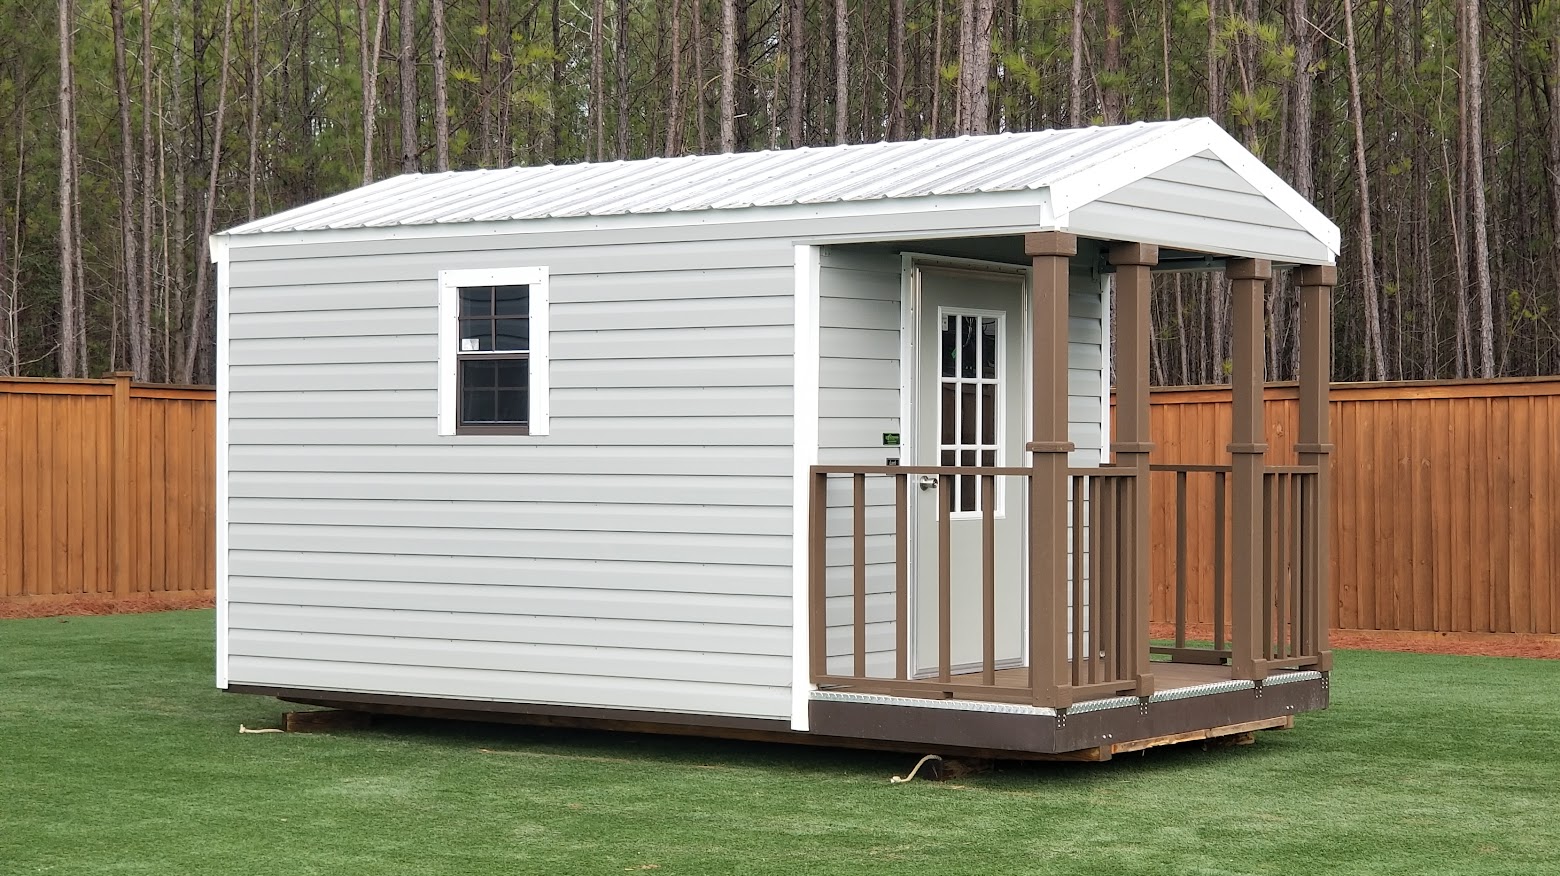 7268 Storage For Your Life Outdoor Options